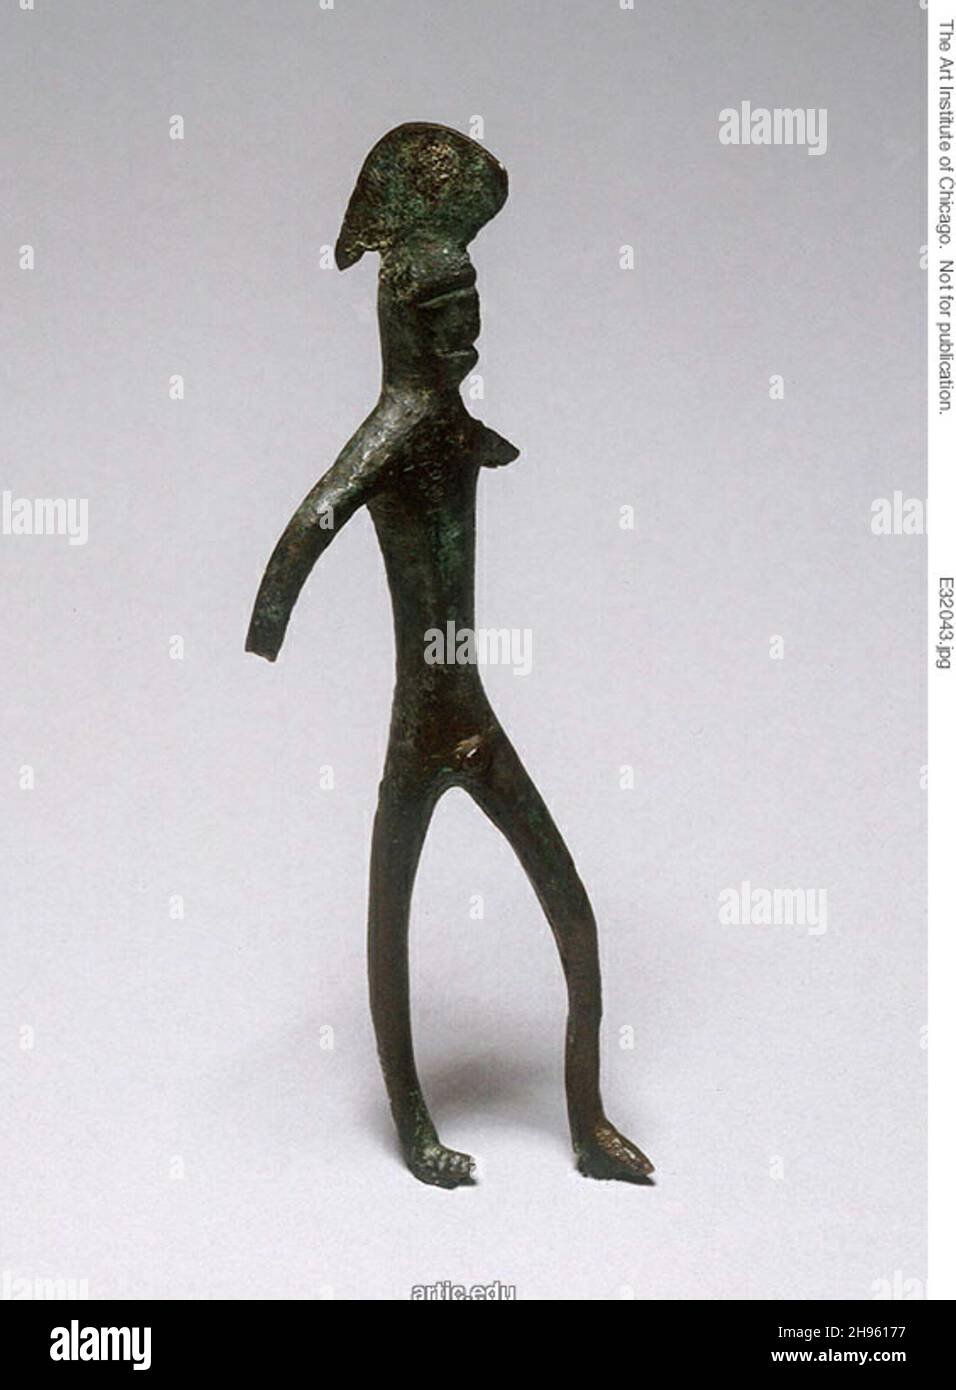 Statuette of a Warrior, 5th century BCE. Stock Photo